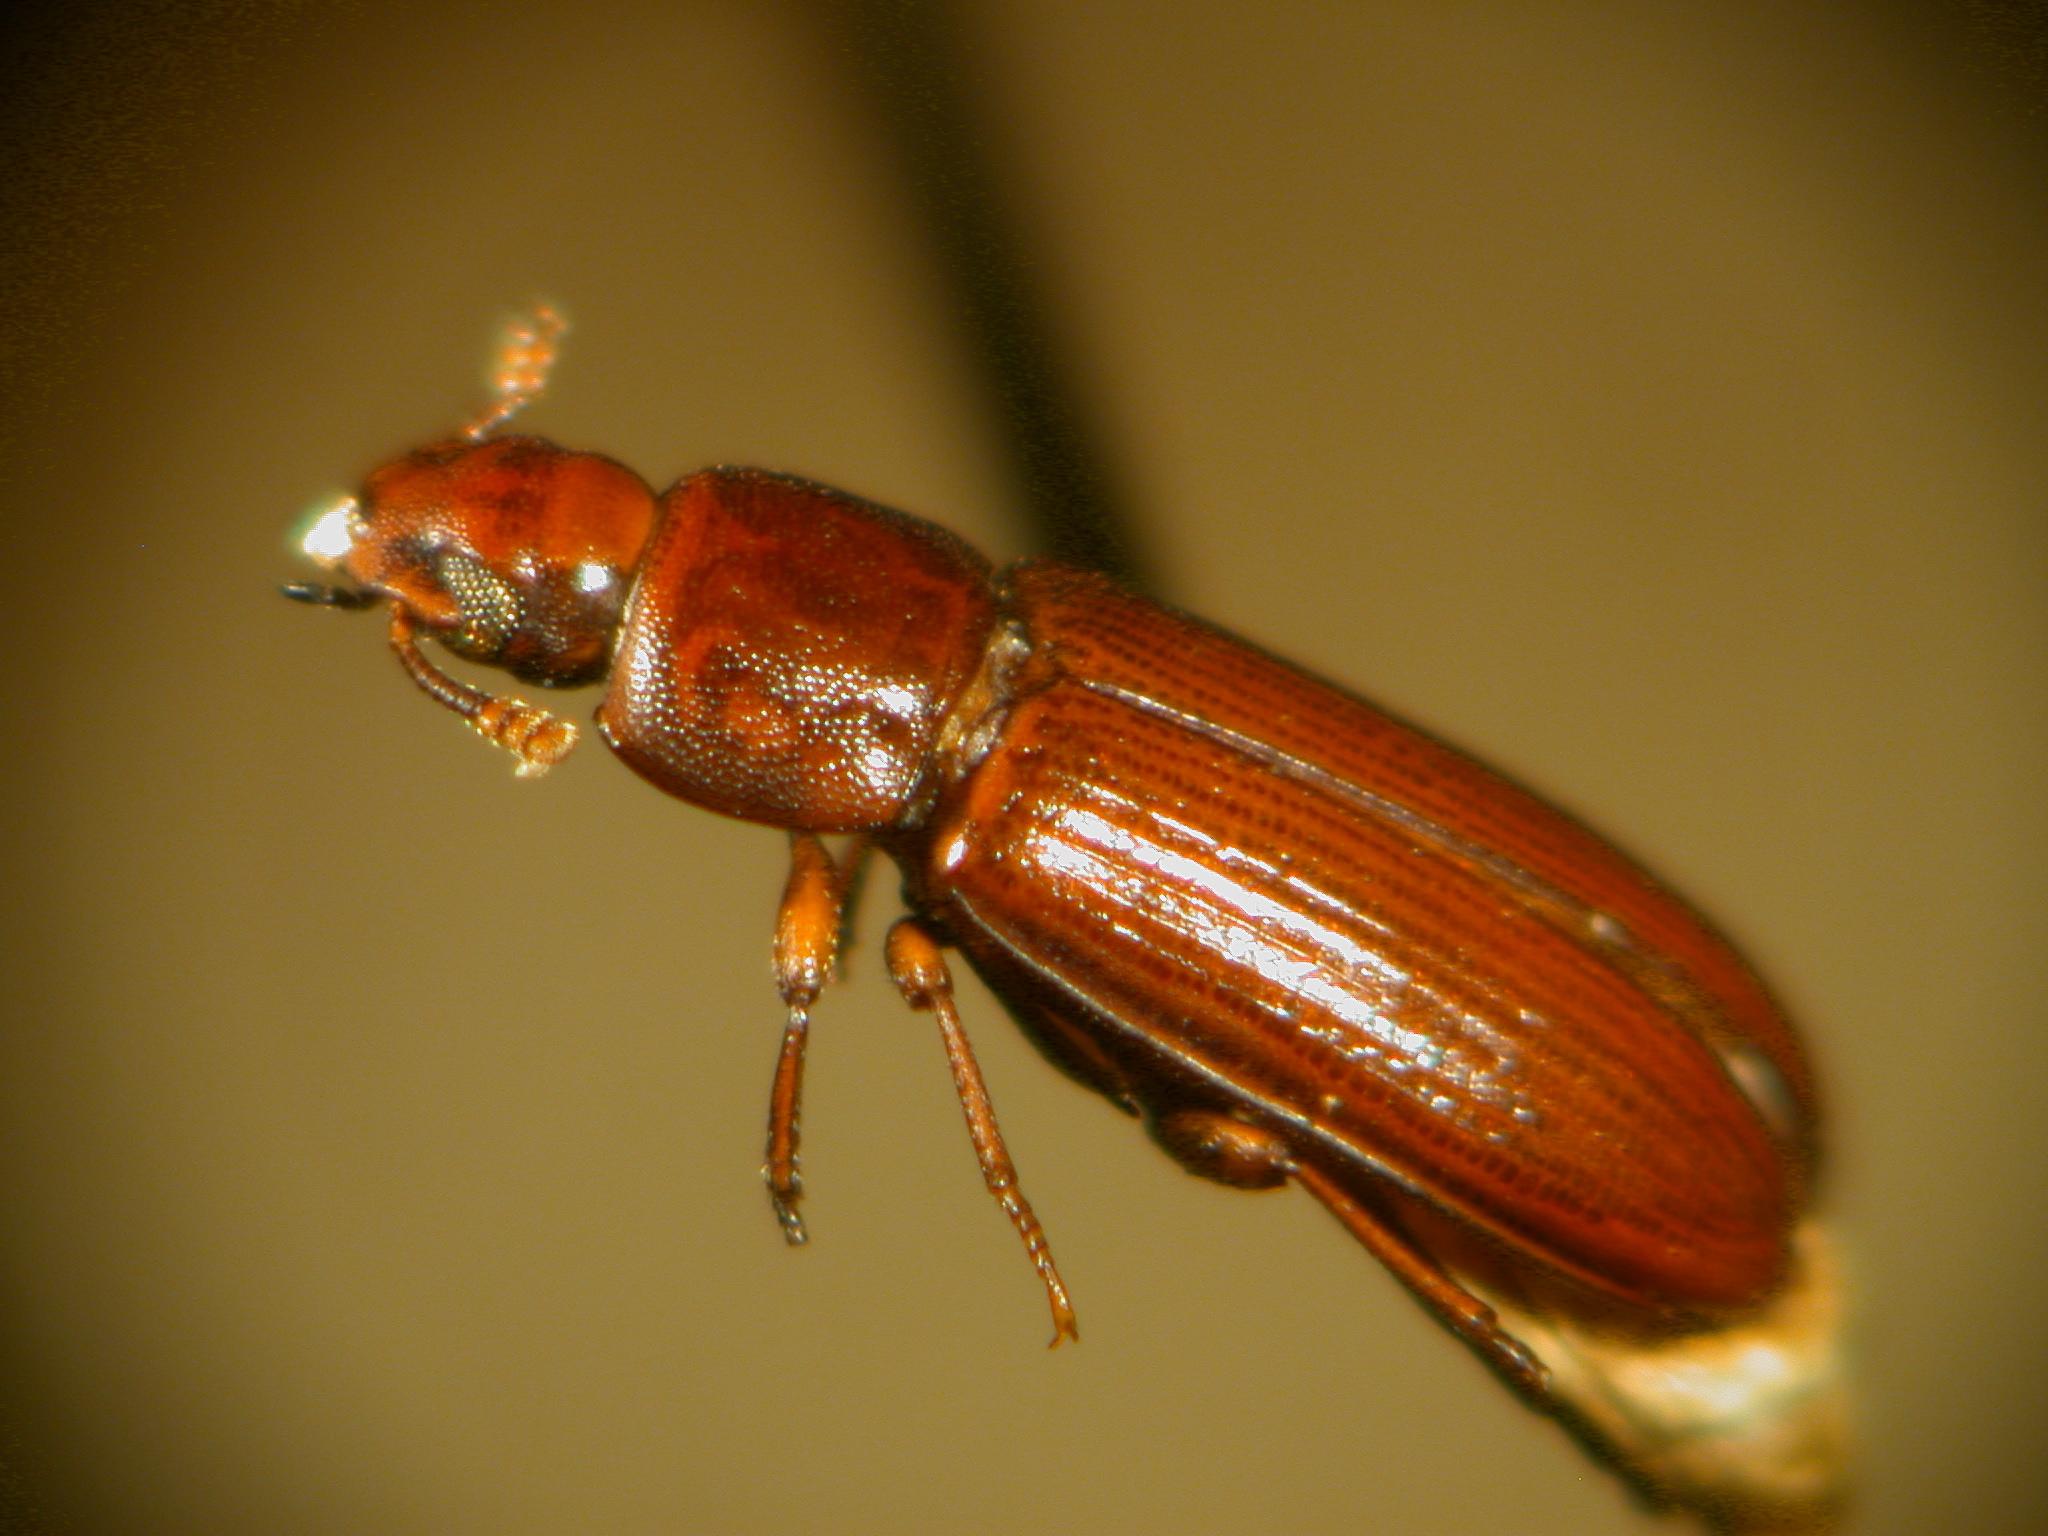 The researchers worked with Tribolium, or flour beetles, a common subject because of its fully sequenced genome